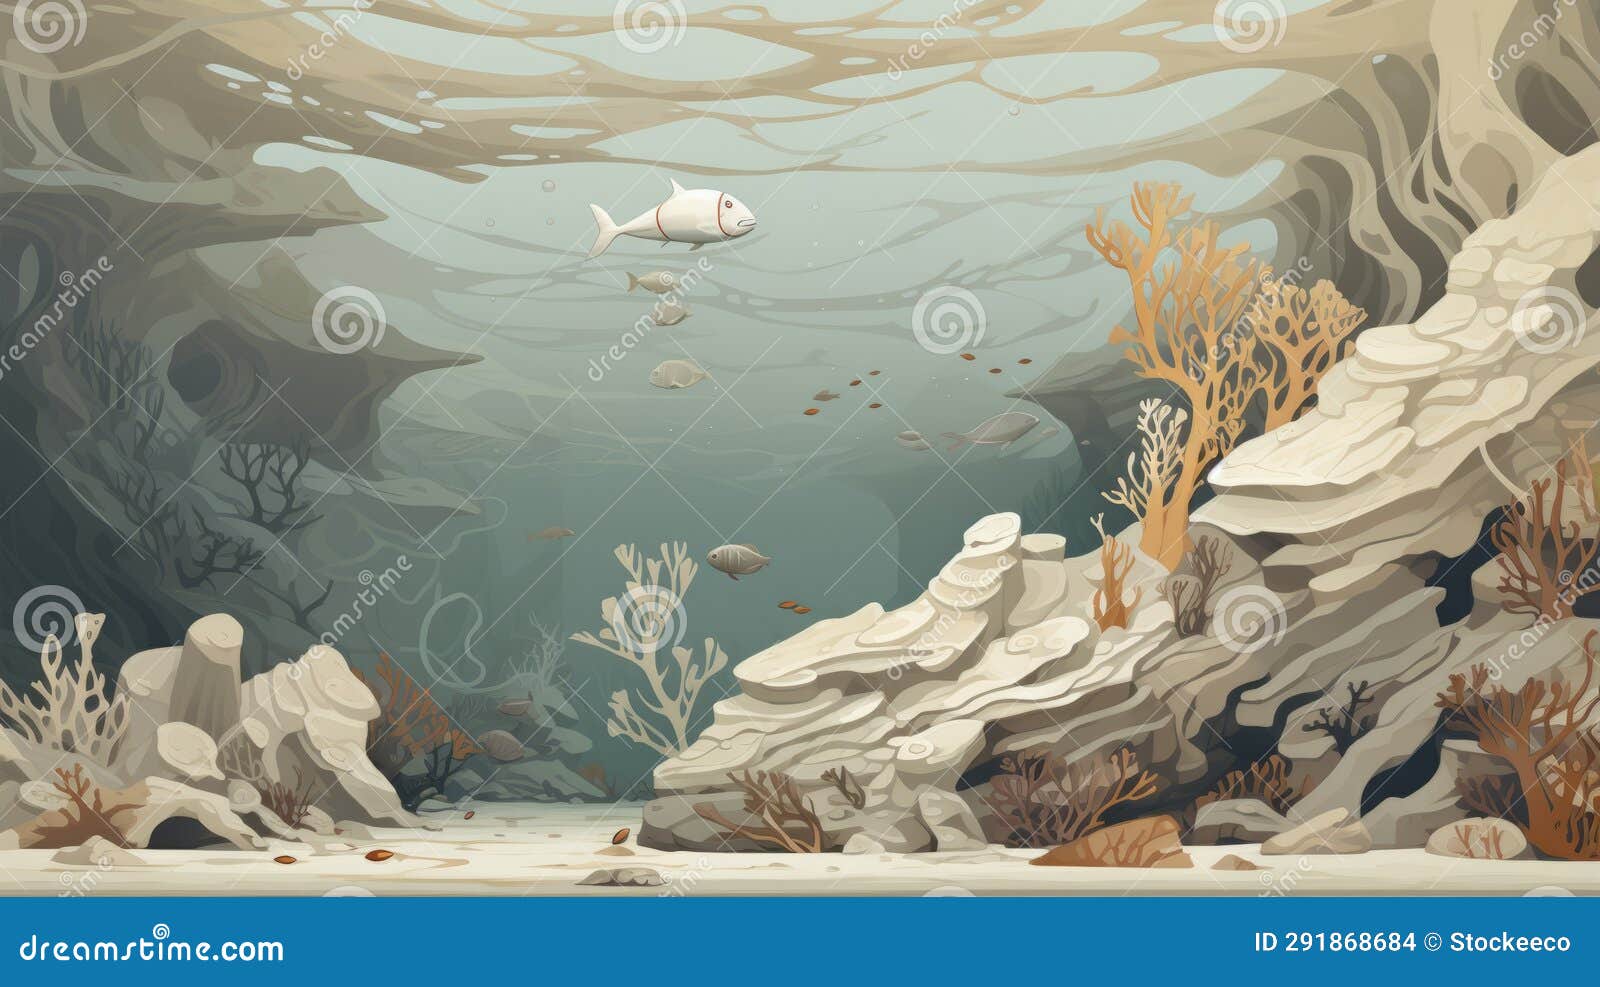 underwater scene with fish and corals: detailed  in neoclassical style